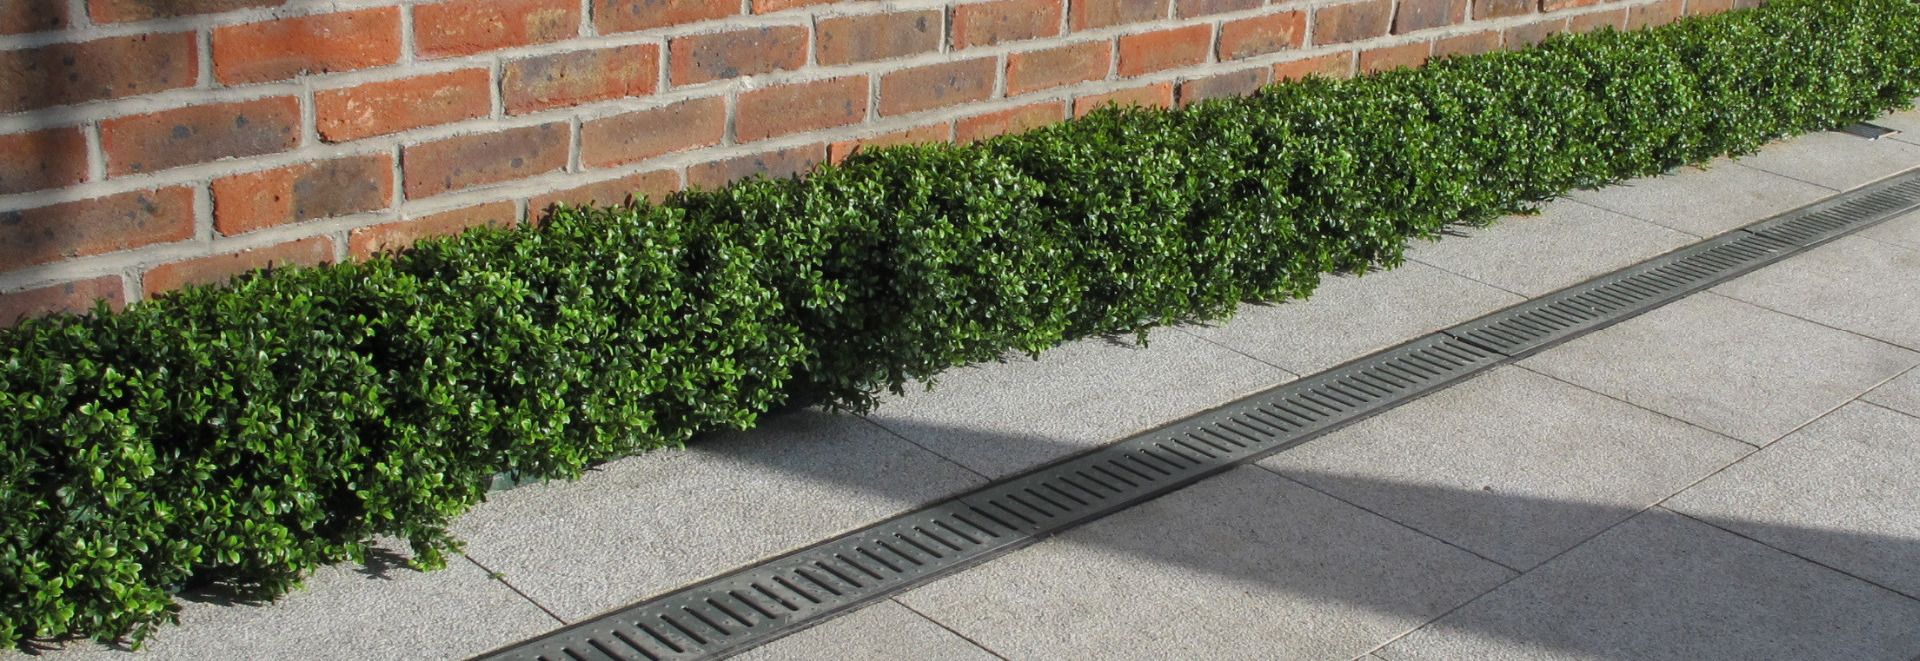 Artificial Box Hedging | Artificial Boxwood Hedges |  On sale now at Owen Chubb GardenStudio, Terenure. 087-2306 128